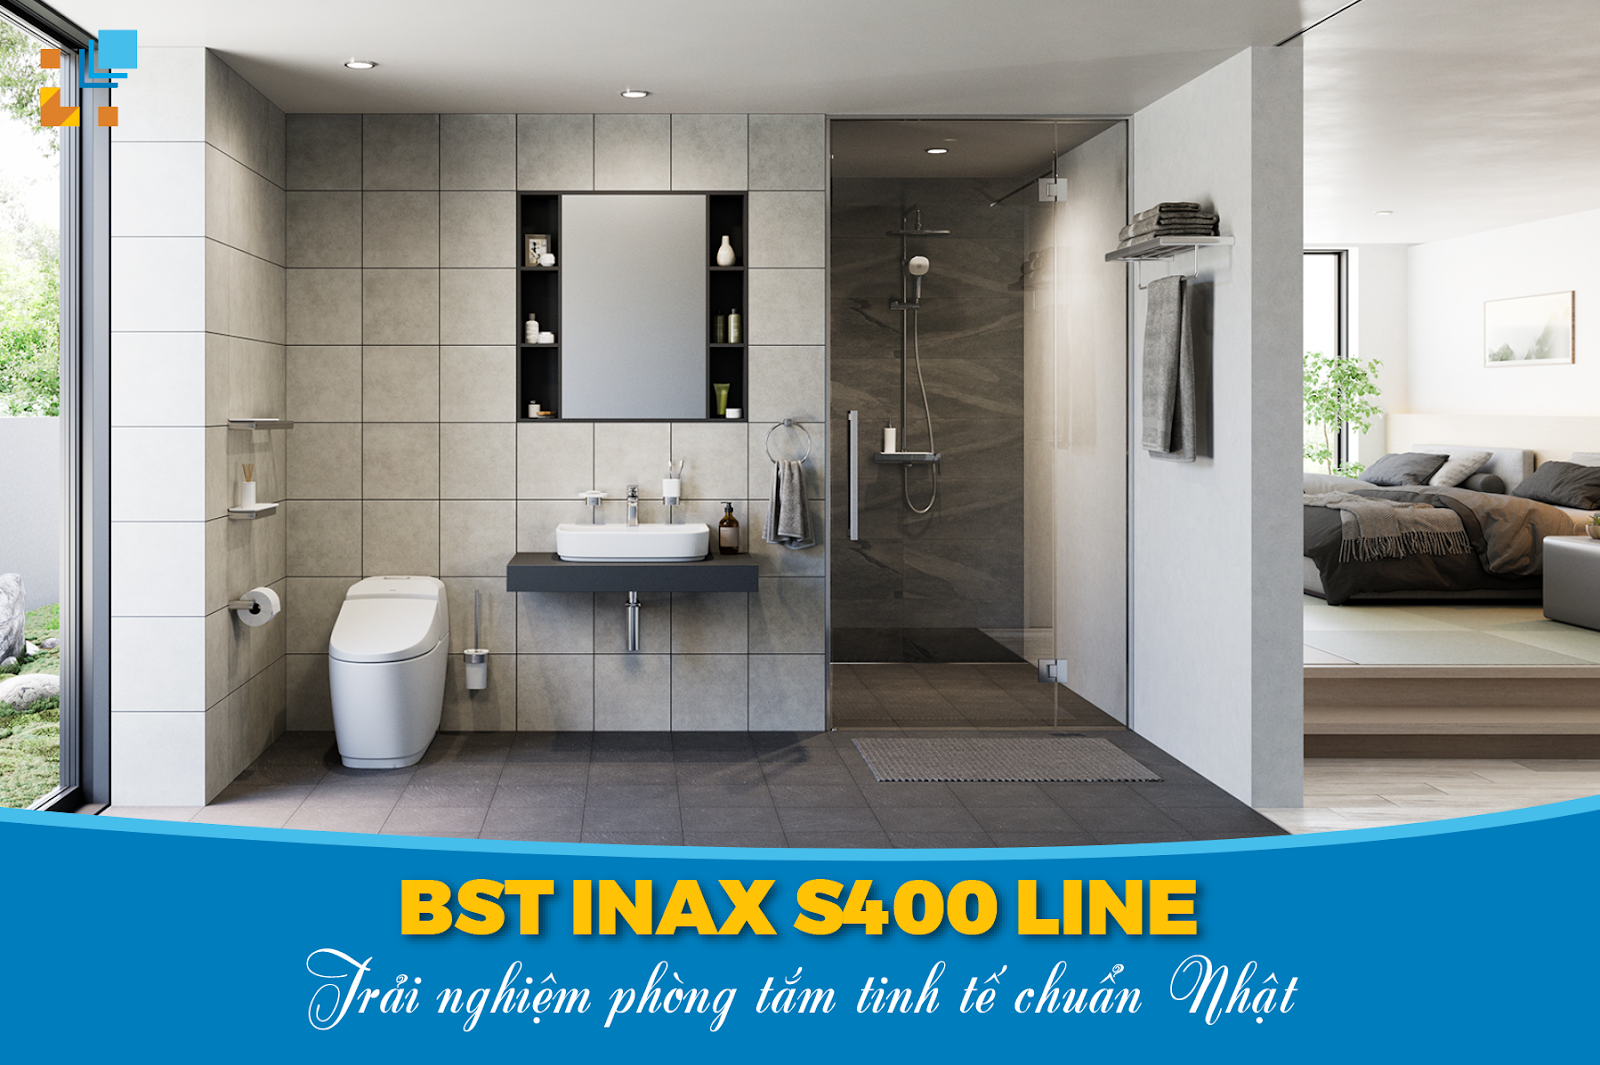 bst s400 line inax